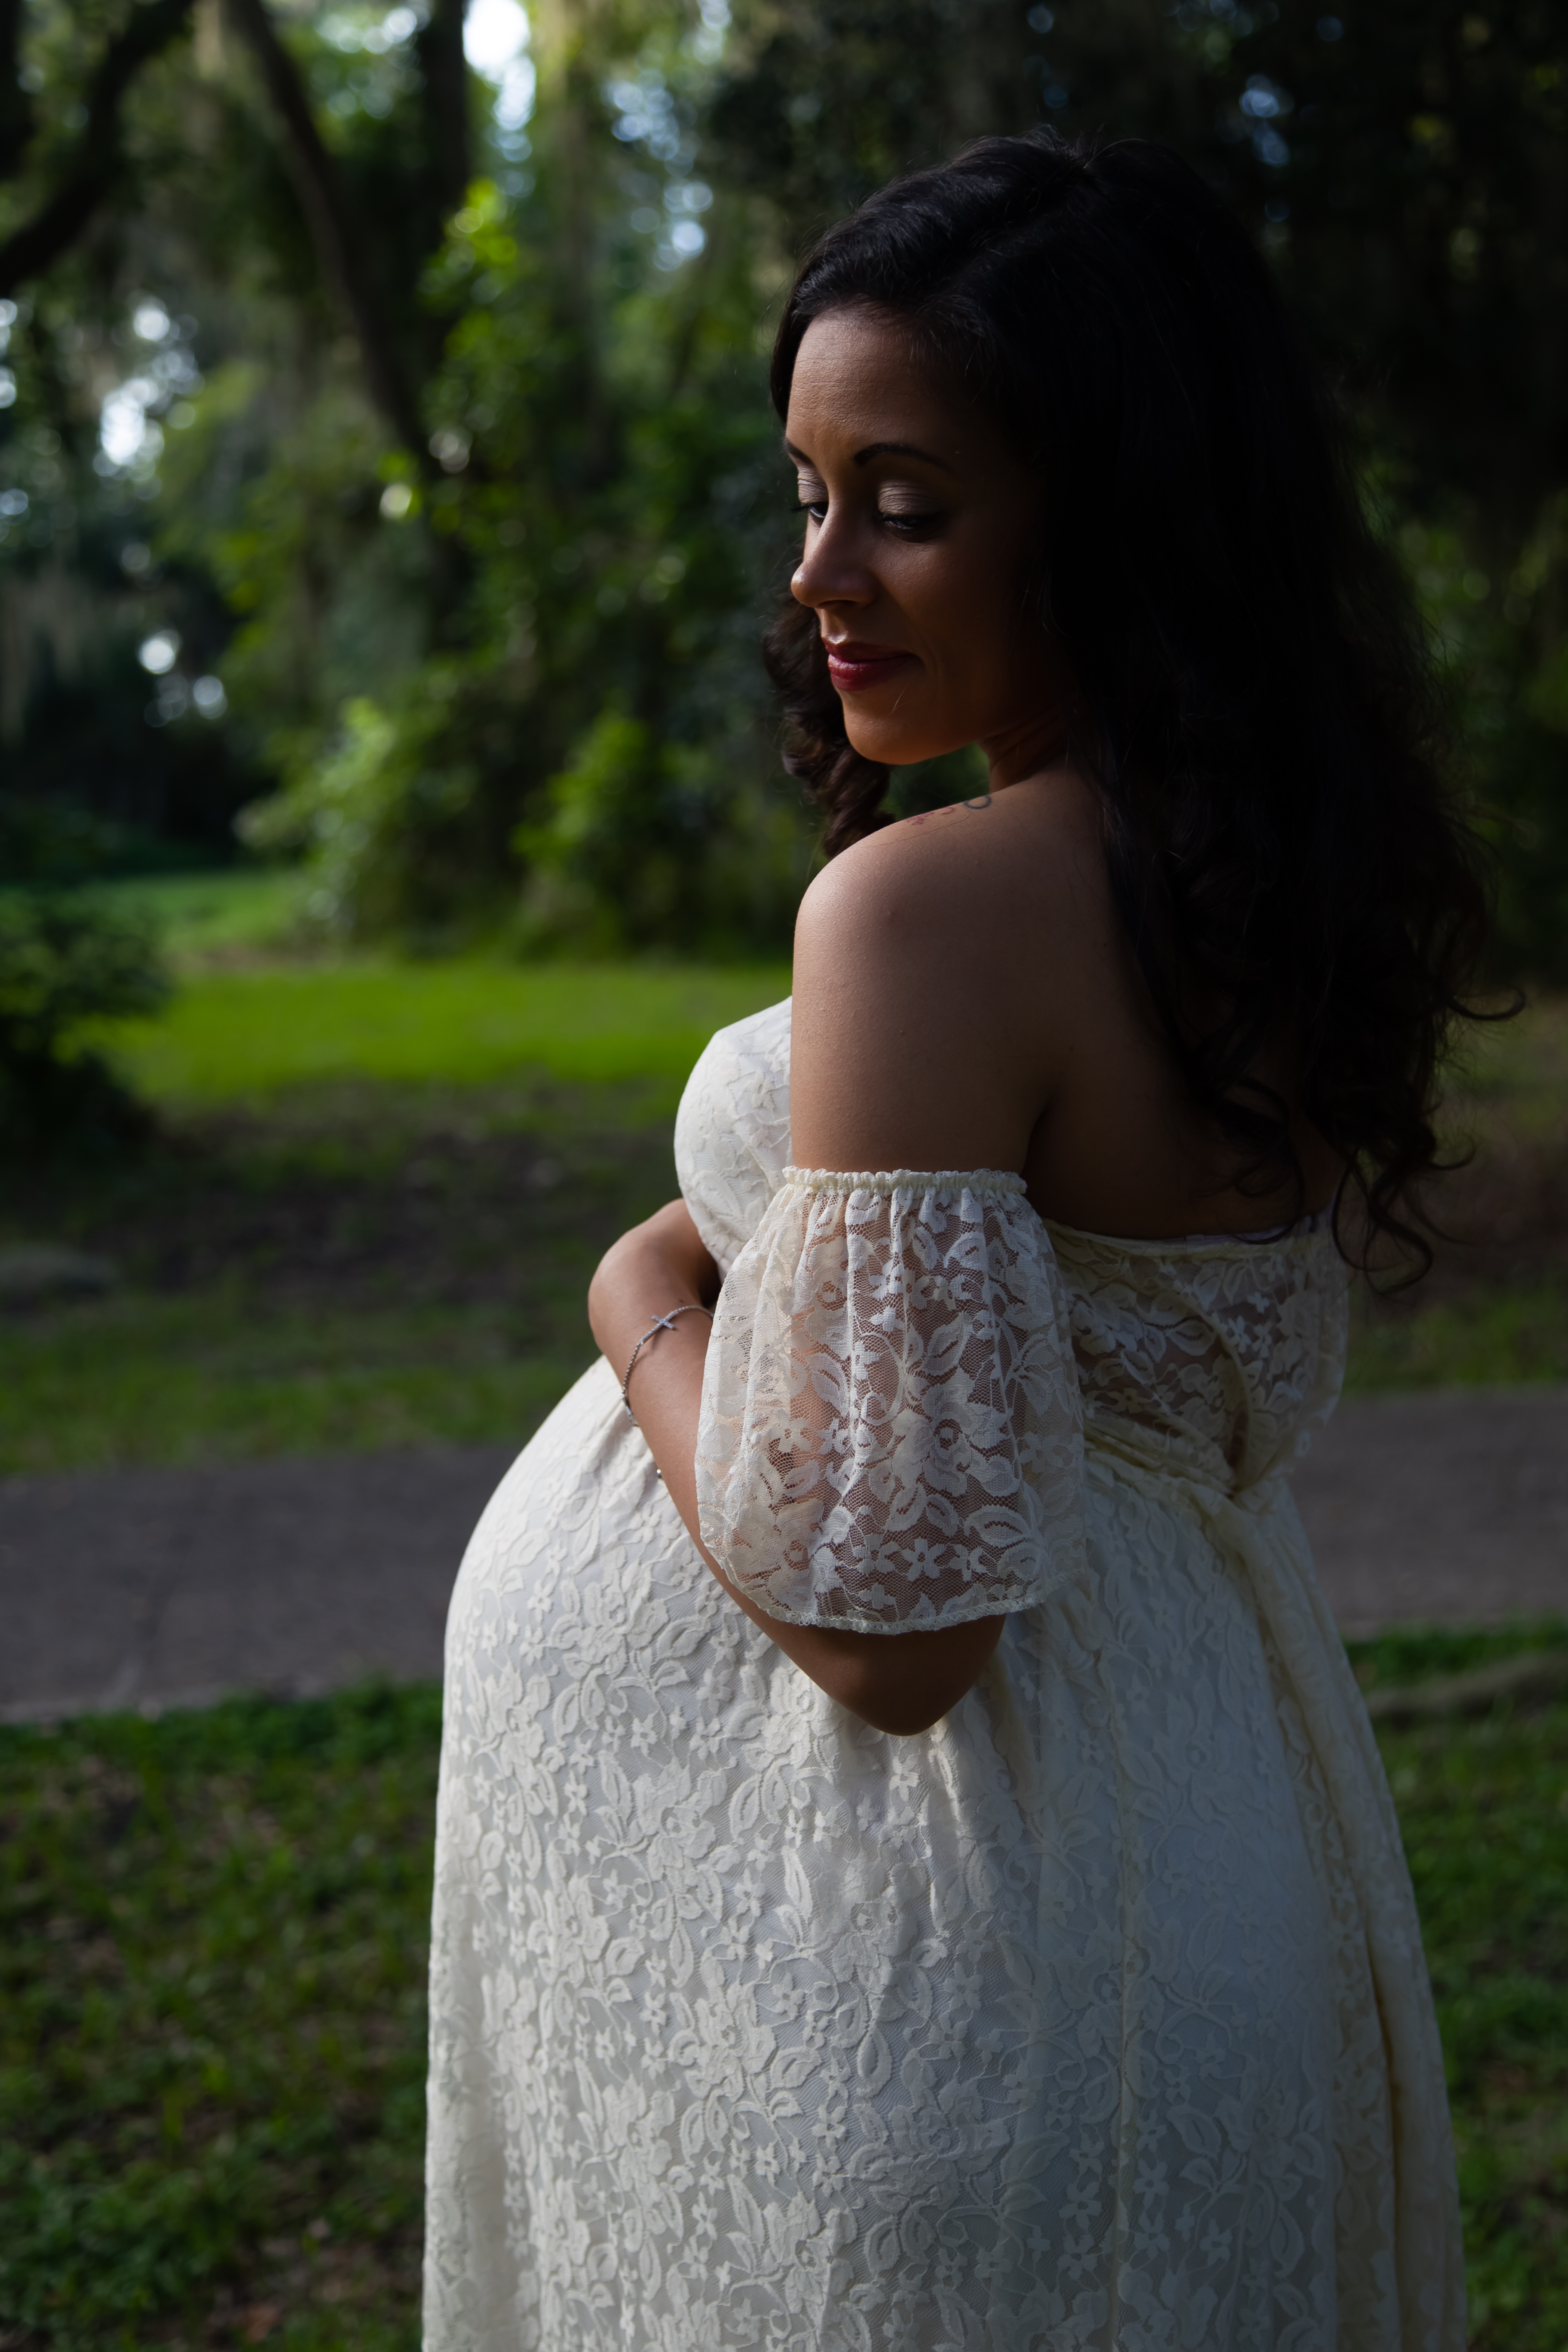 Maternity Magazine Submissions